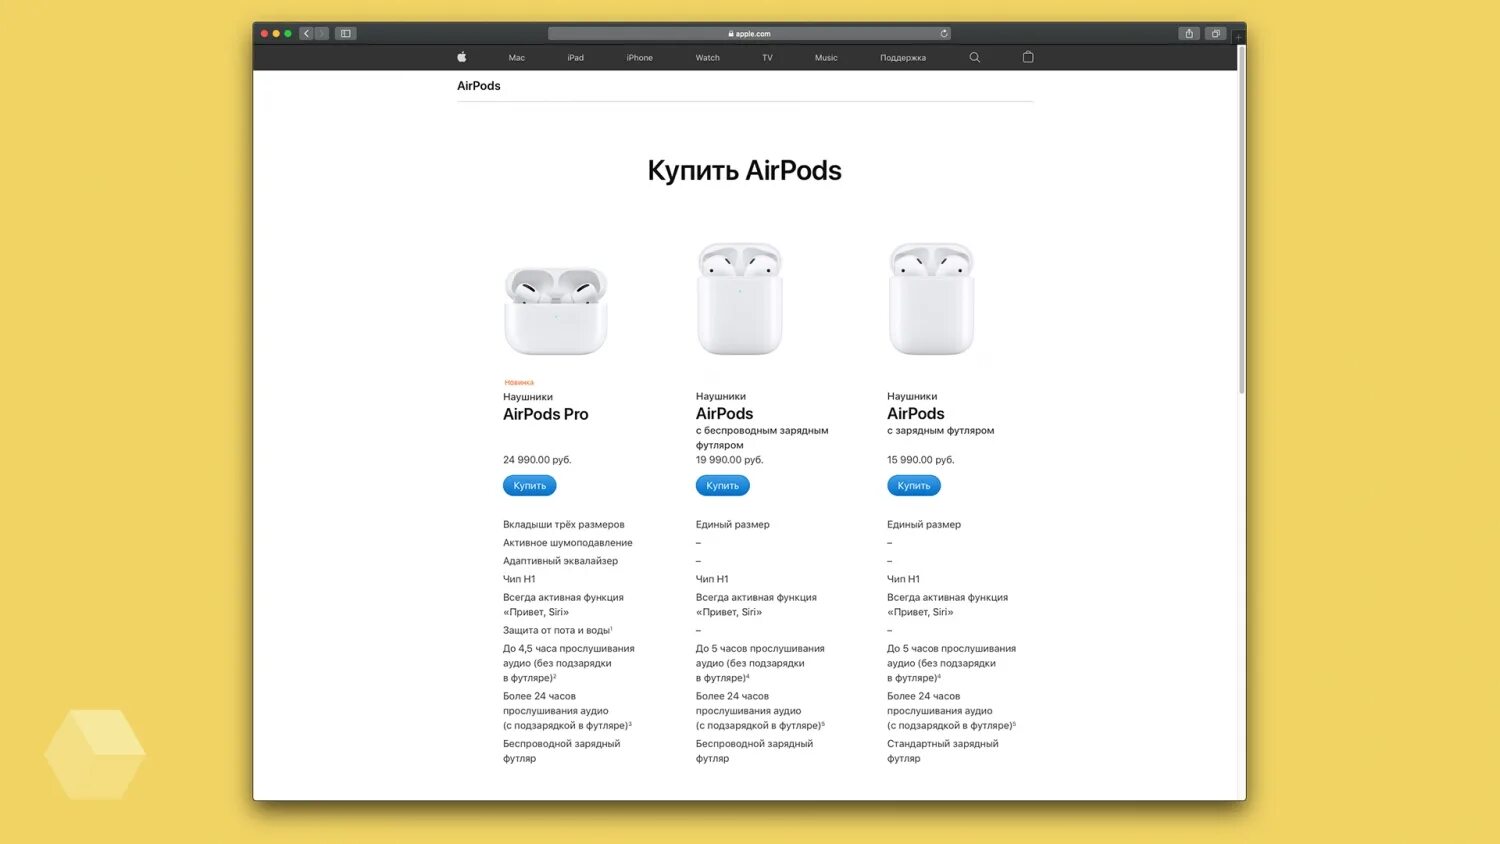 AIRPODS 2 Pro МТС. AIRPODS Pro Размеры. AIRPODS МТС. AIRPODS Pro диаметр динамика. Airpods pro без кейса